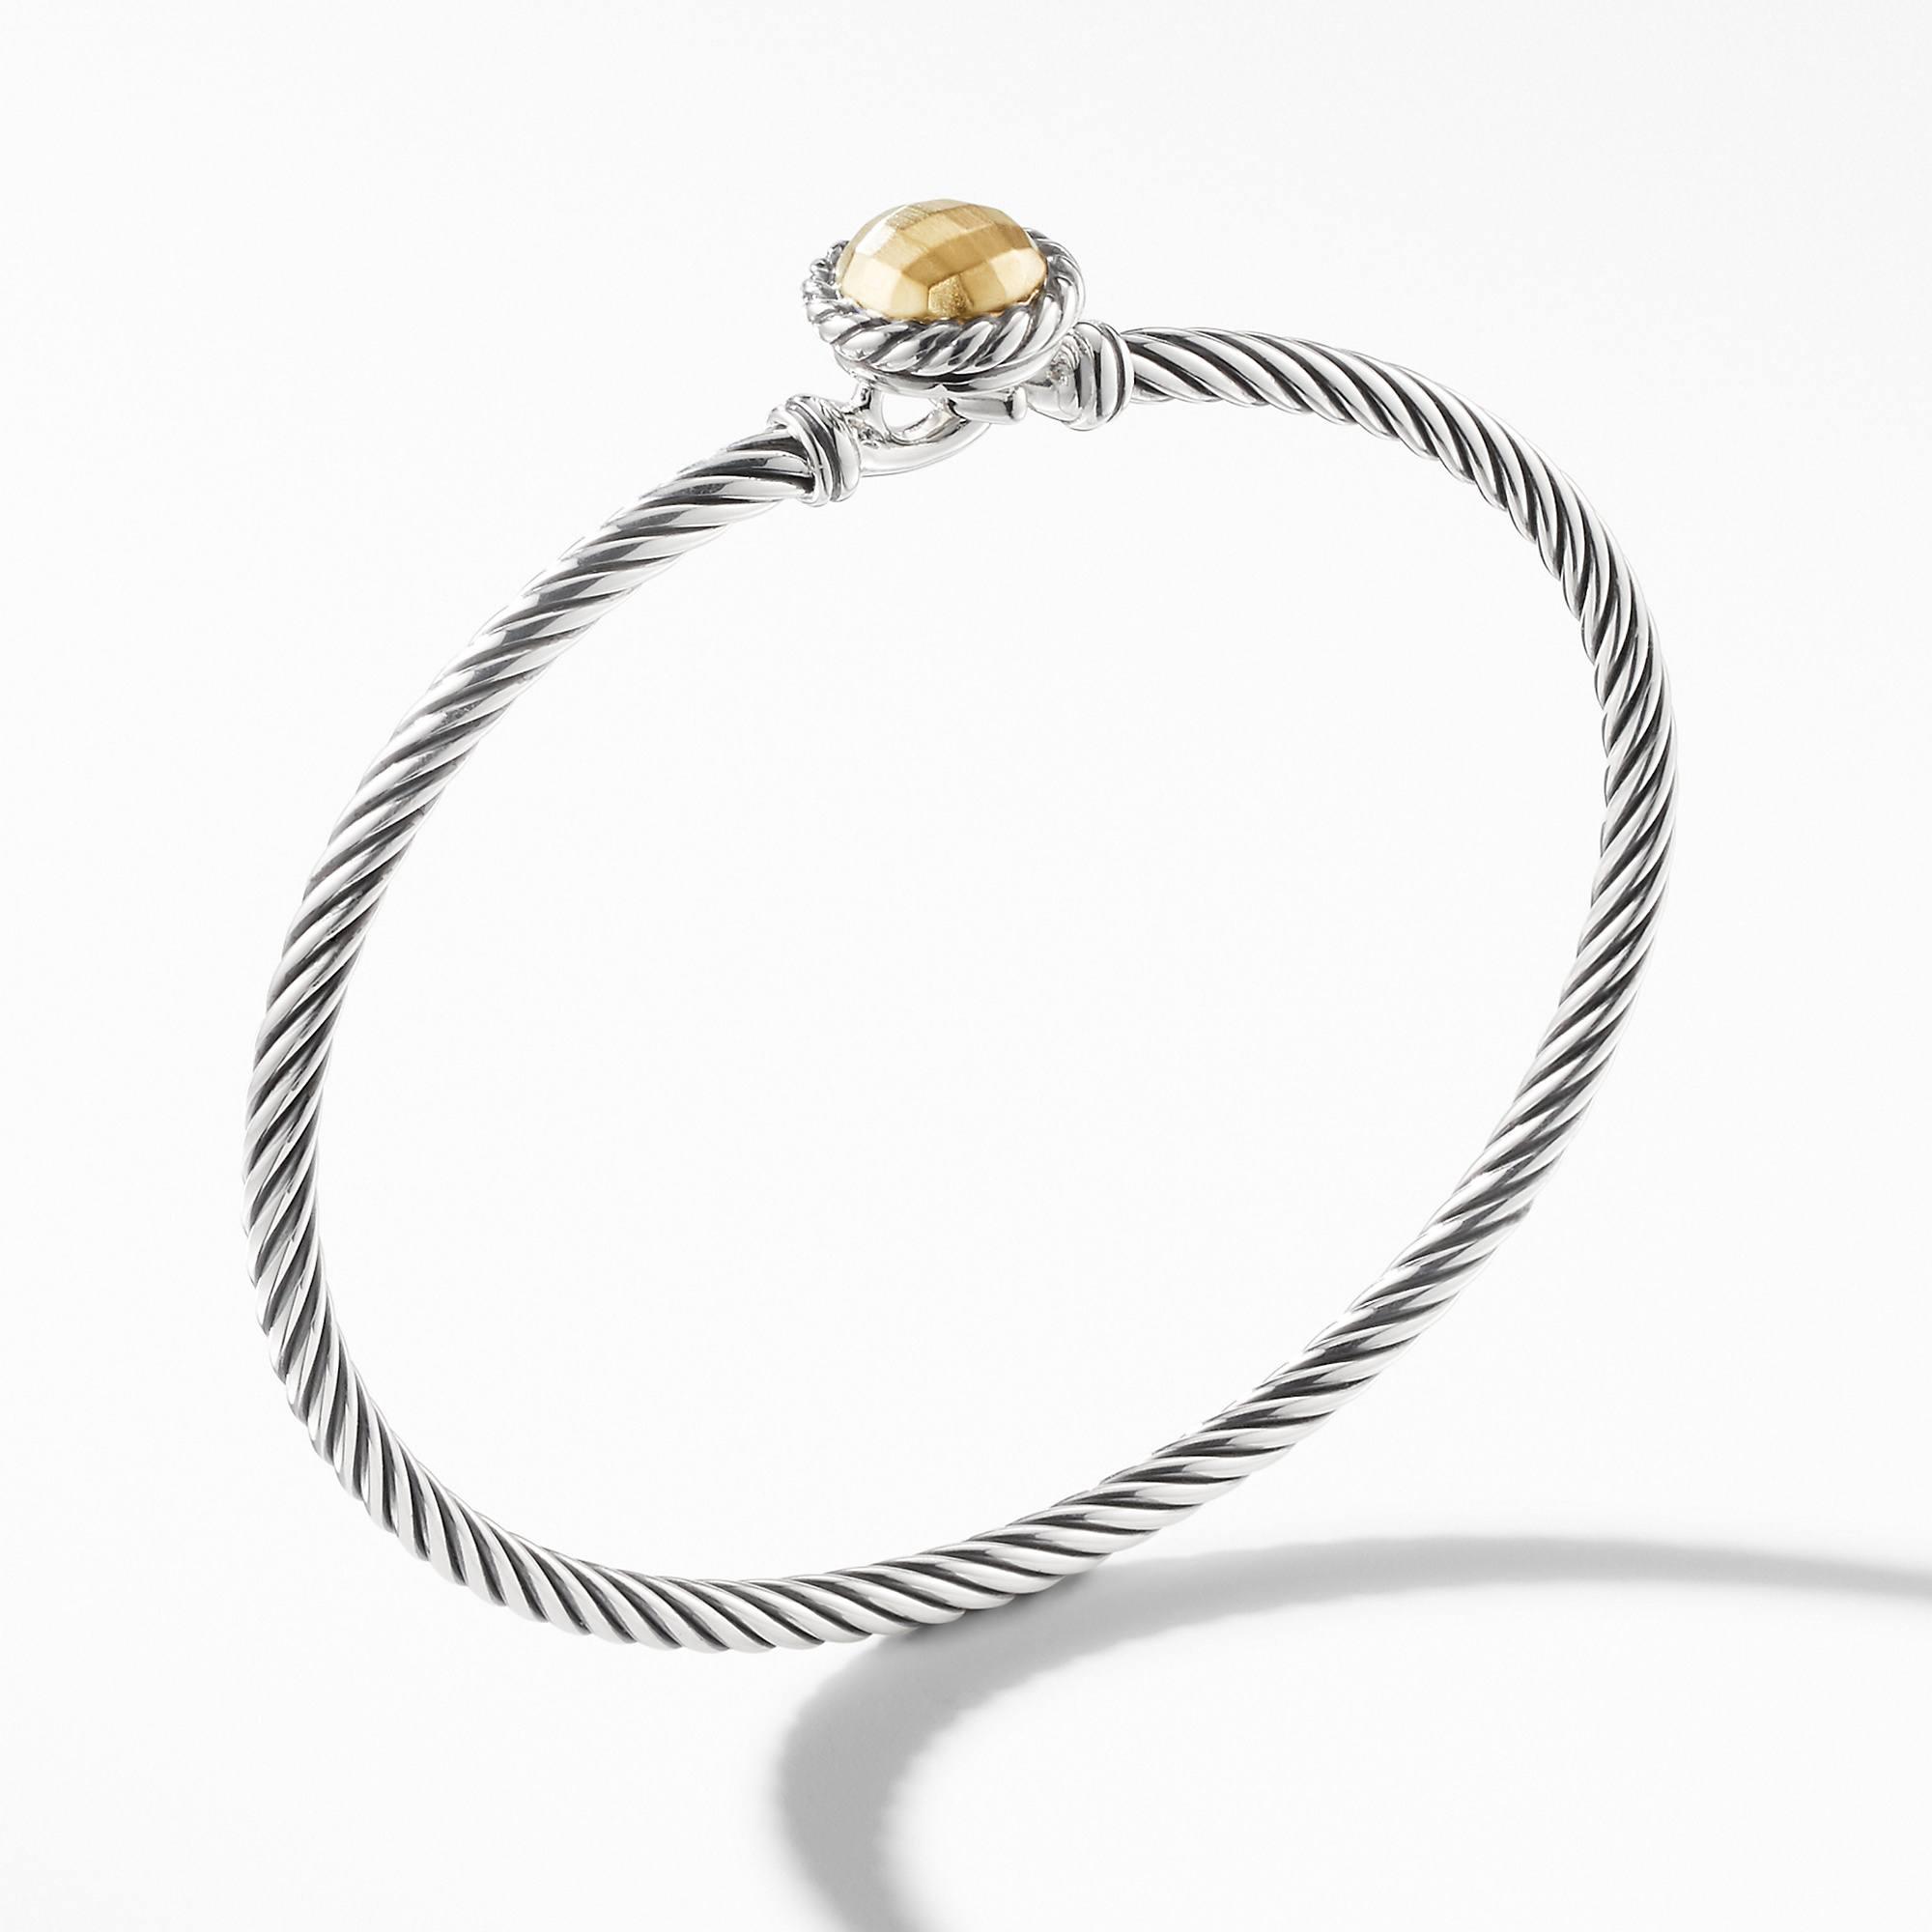 David Yurman Chatelaine Bracelet With Gold Dome And 18K Gold